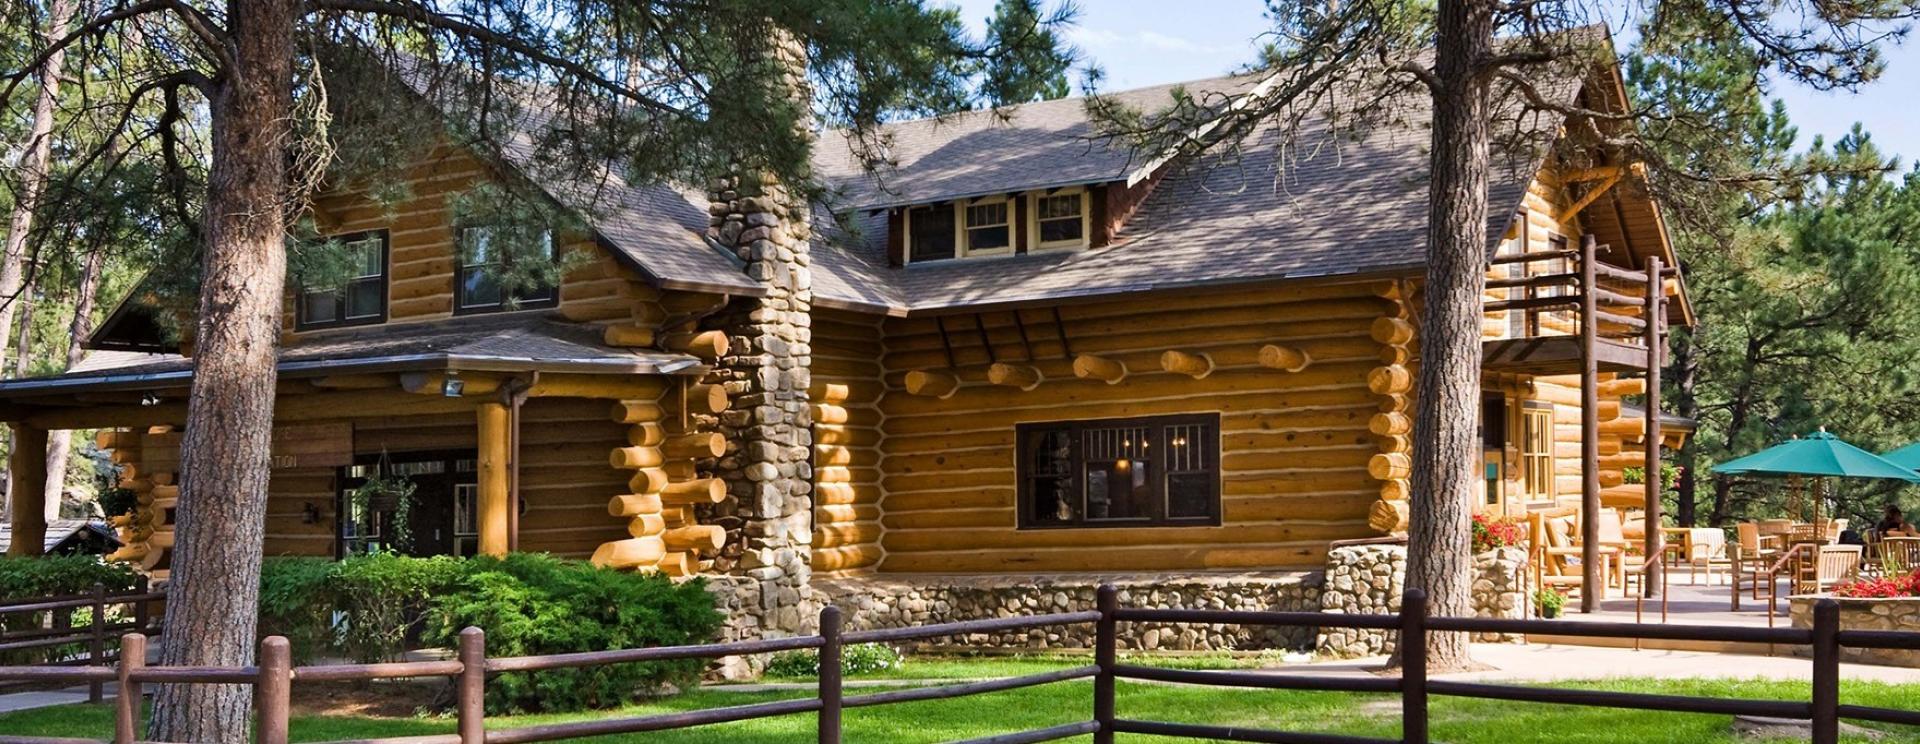 Blue Bell Lodge at Custer State Park